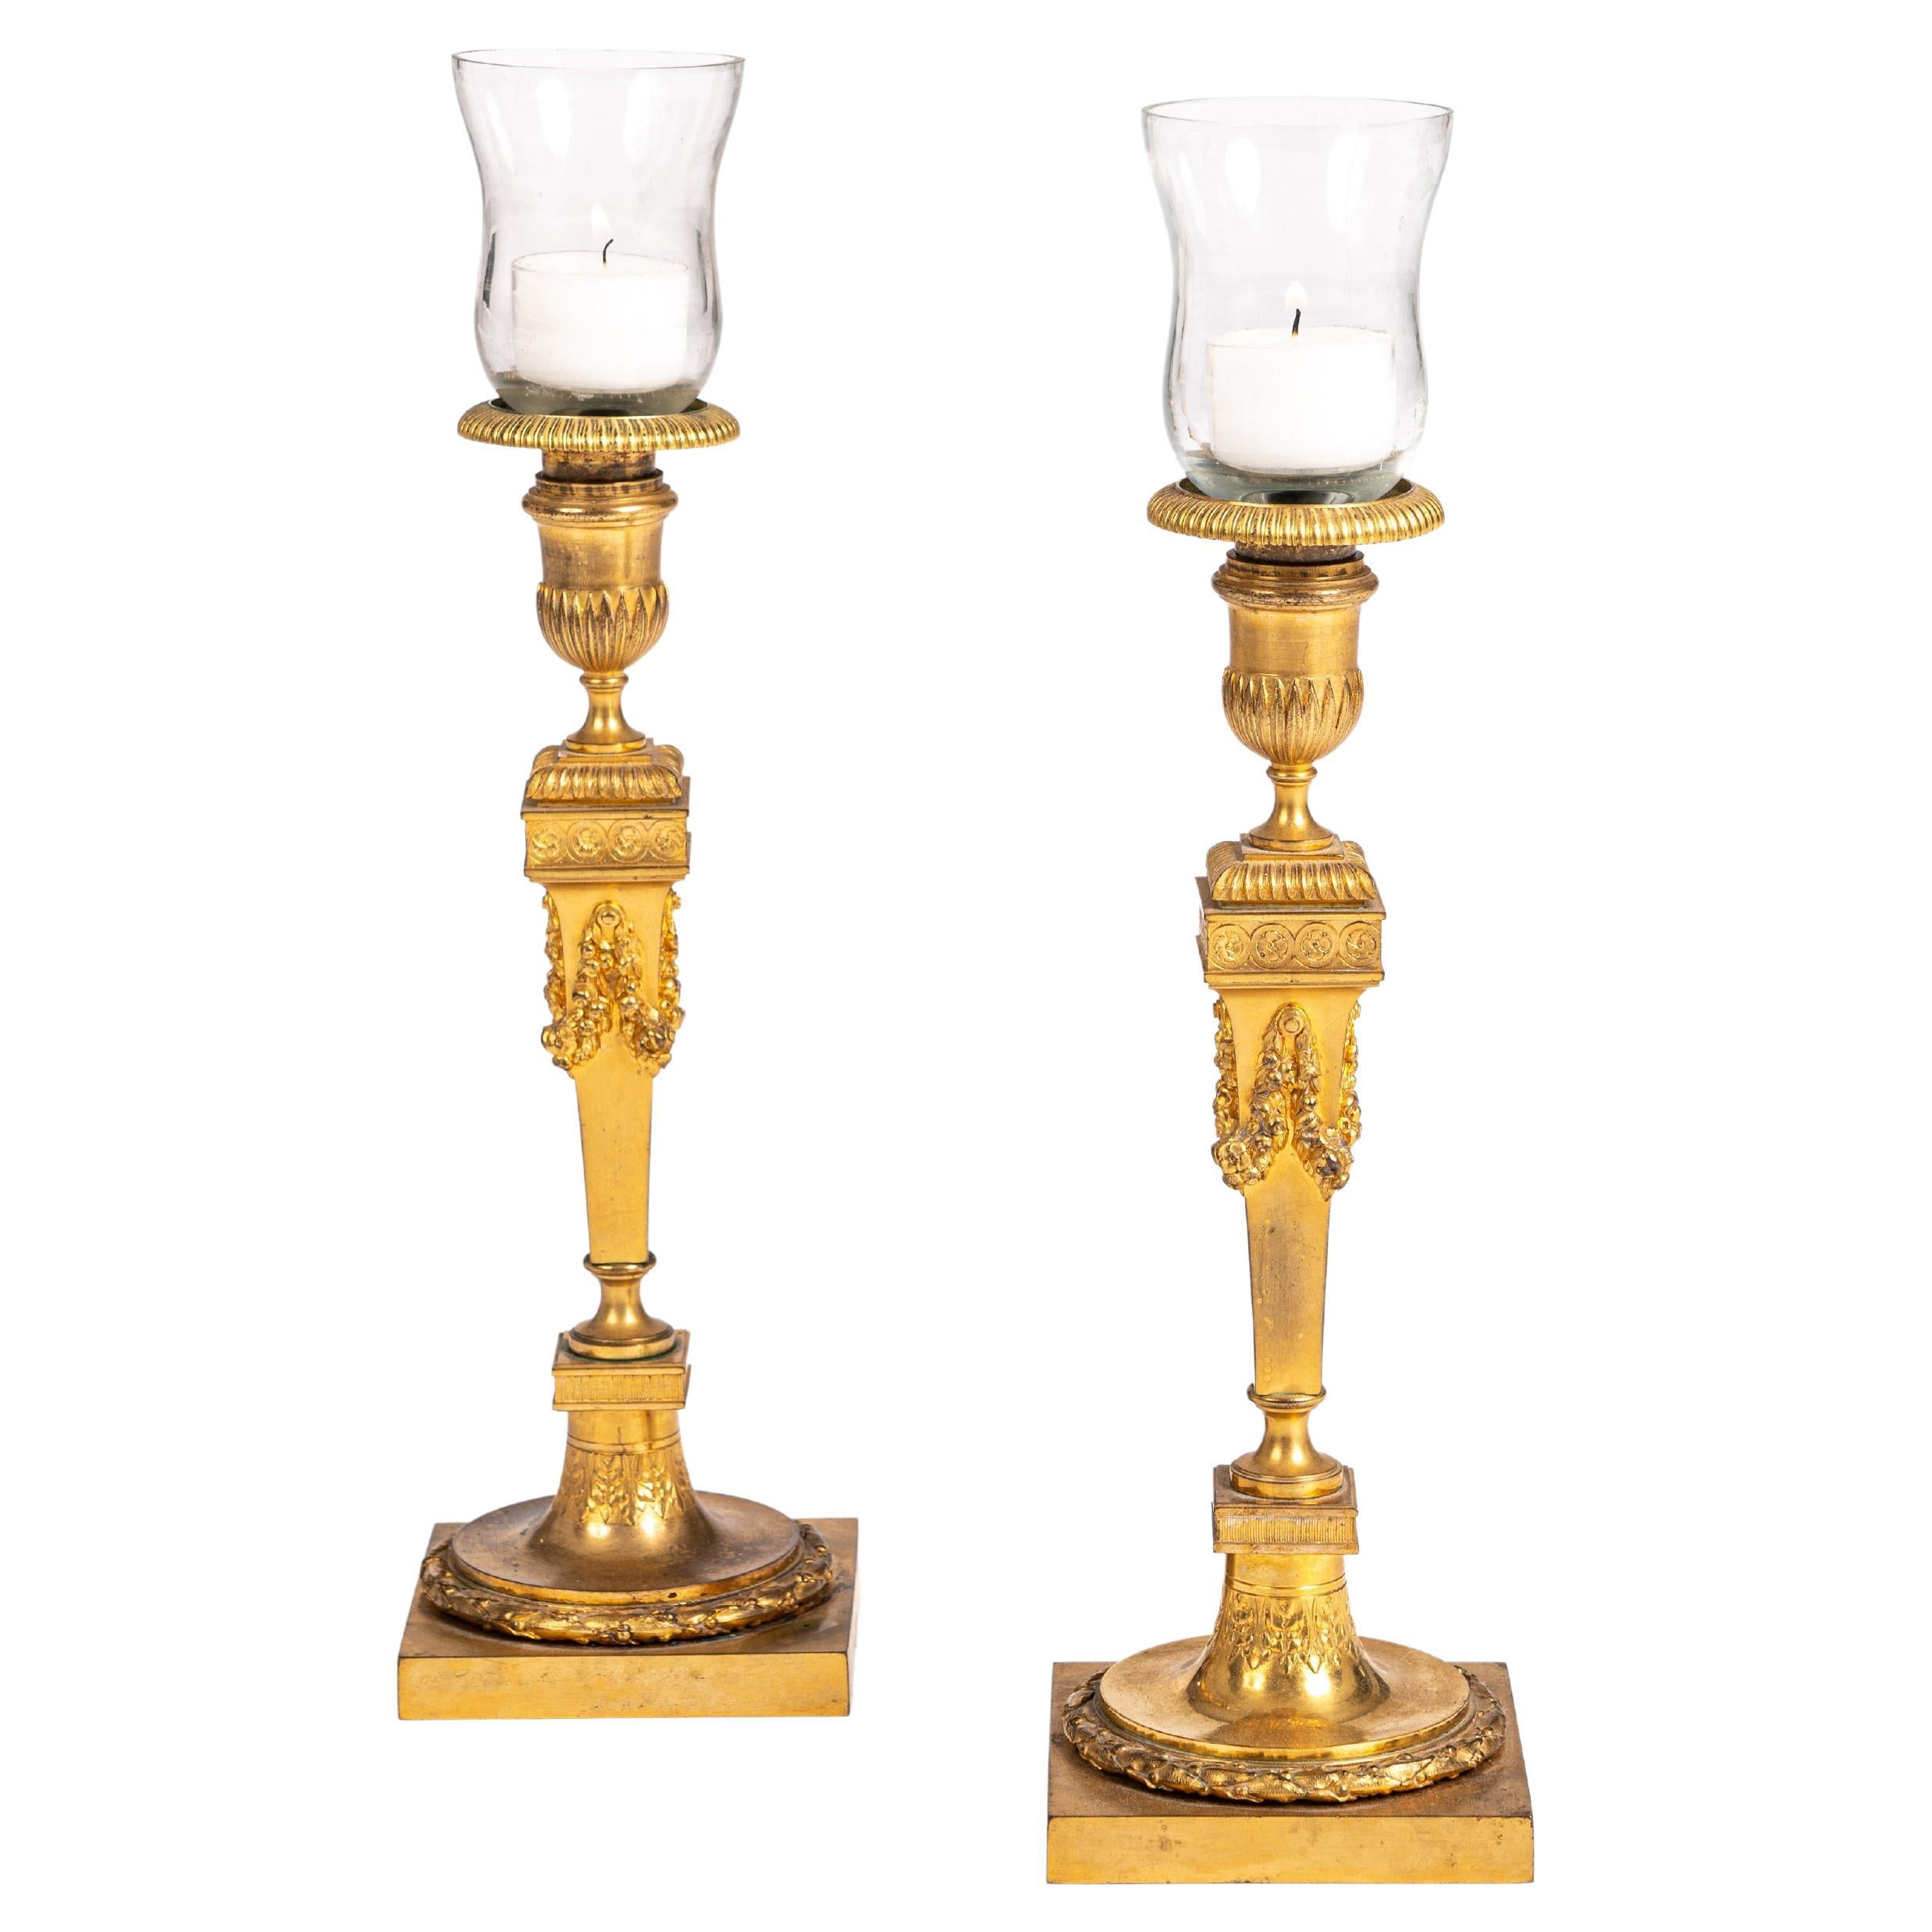 Pair of Classicistical Fire Gilded Candlesticks France 1840 by F. Barbedienne For Sale